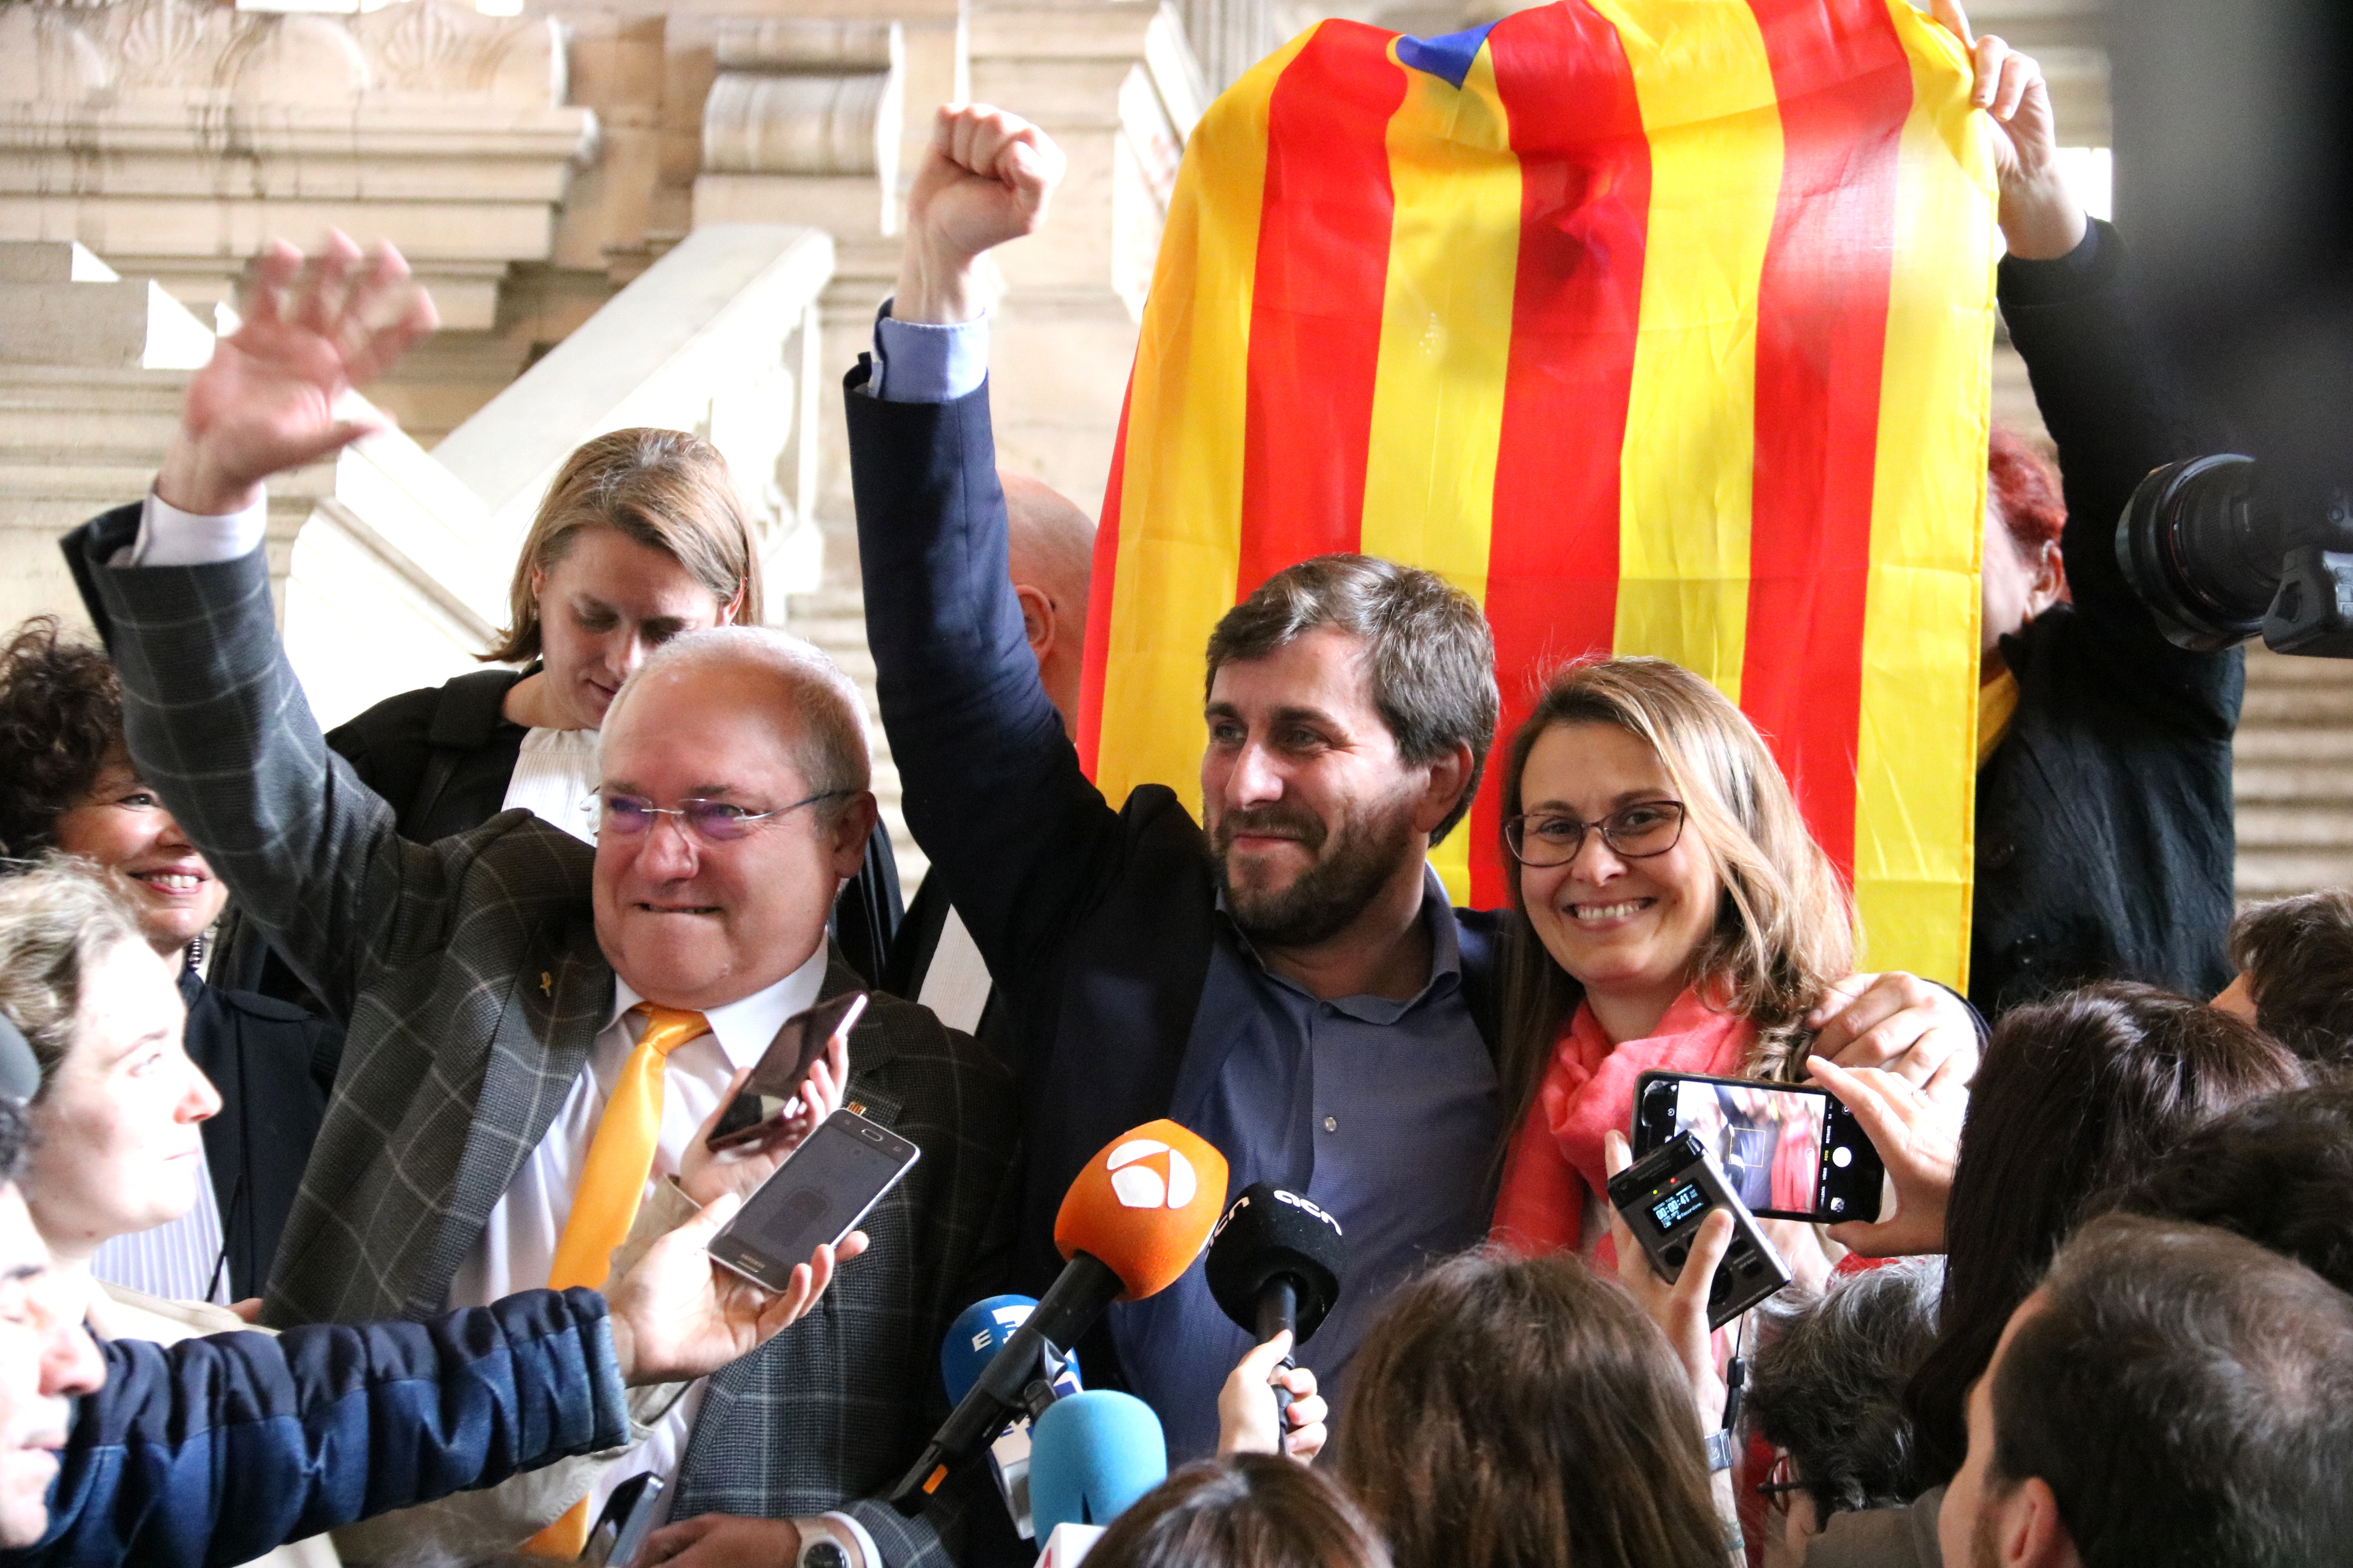 Former Catalan ministers Lluís Puig, Toni Comín and Meritxell Serret, after a court in Brussels rejected extraditing them to Spain (by Blanca Blay)